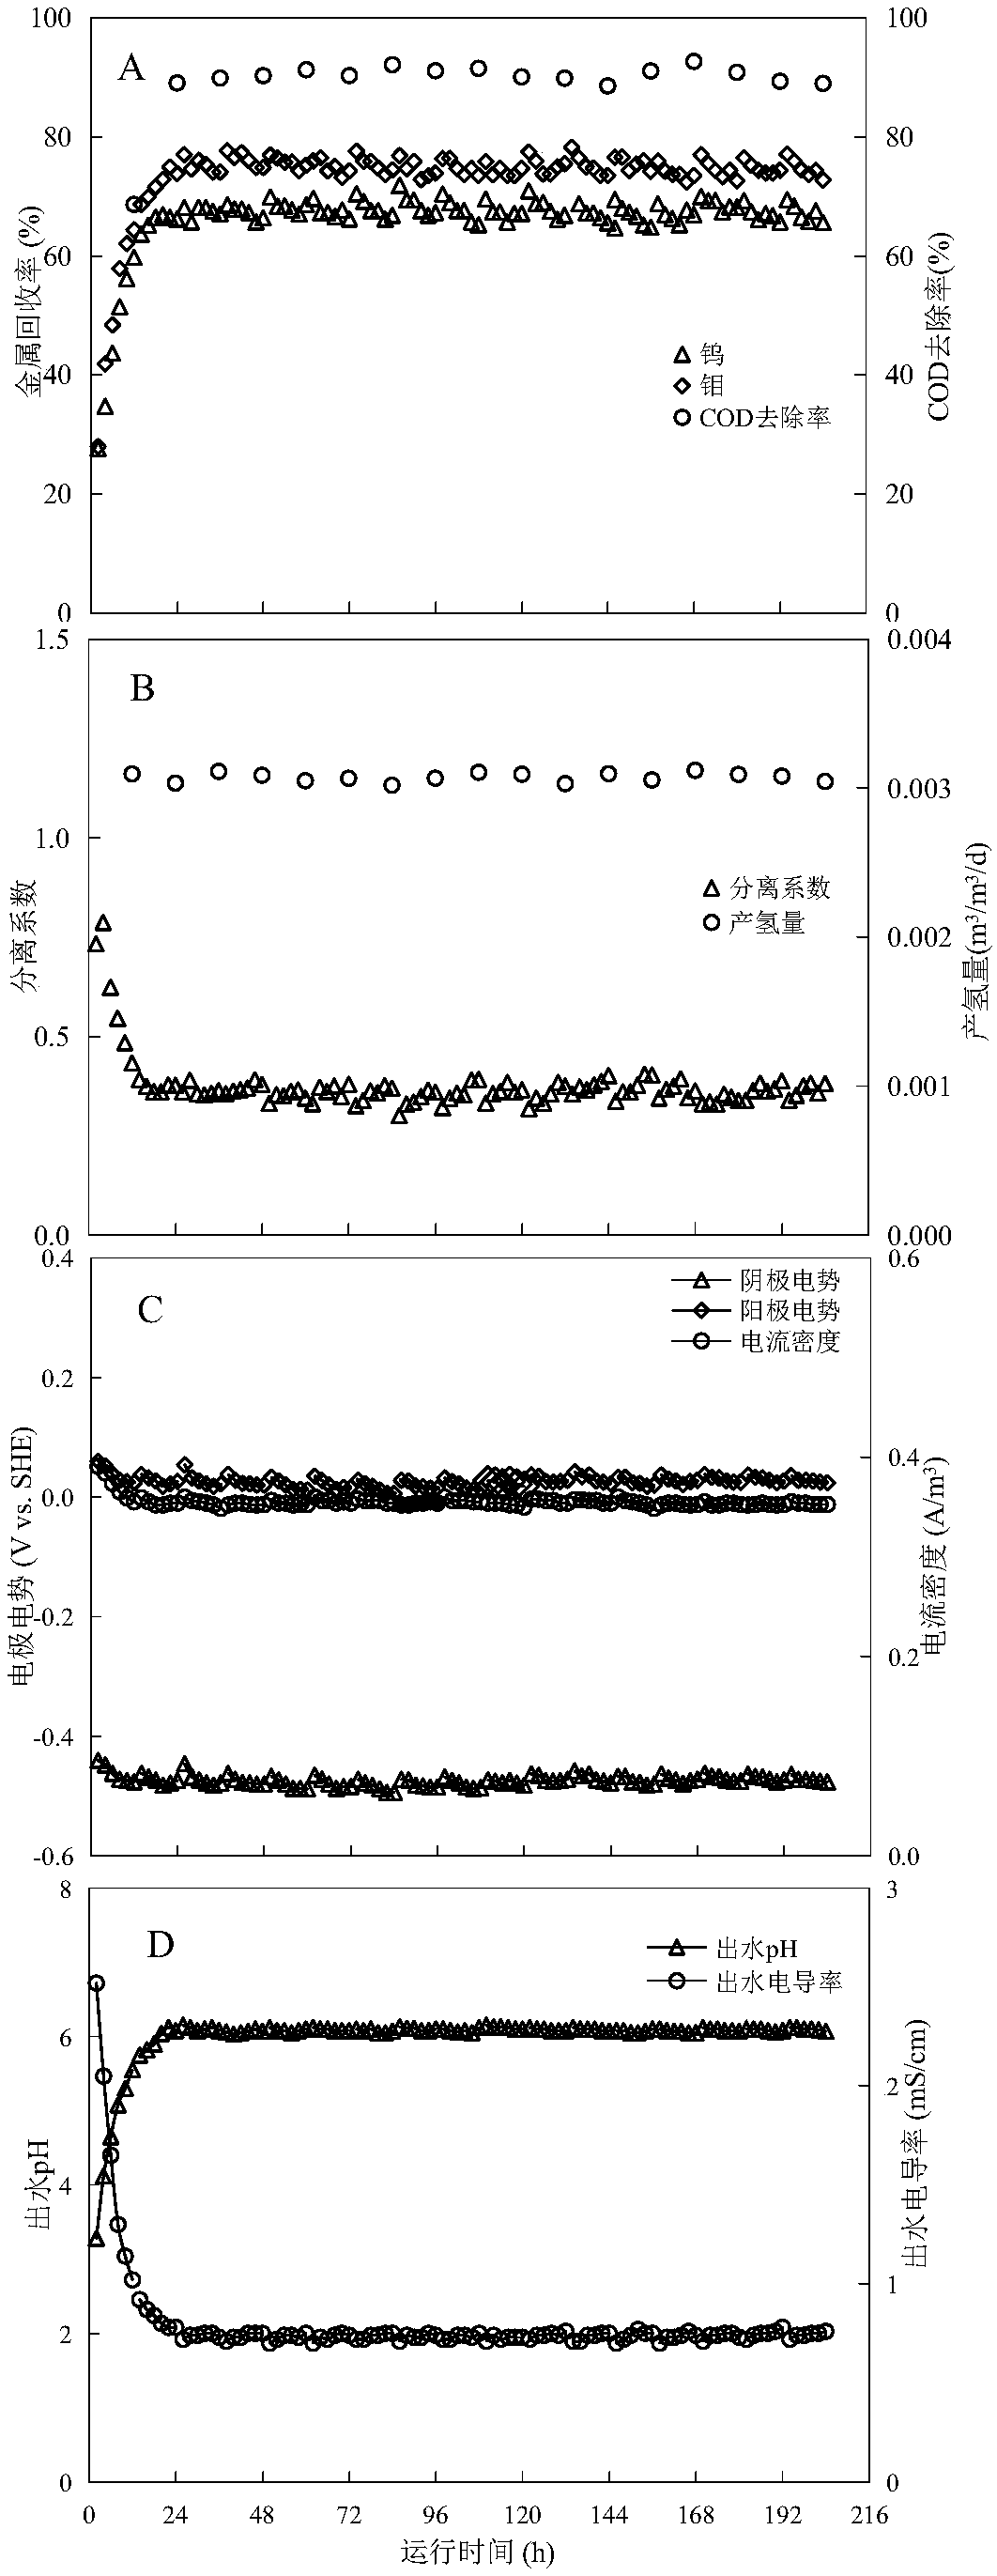 Method for treating tungsten-molybdenum organic mixed waste water cleanly and thoroughly and recycling metal and hydrogen gas byproduct synchronously